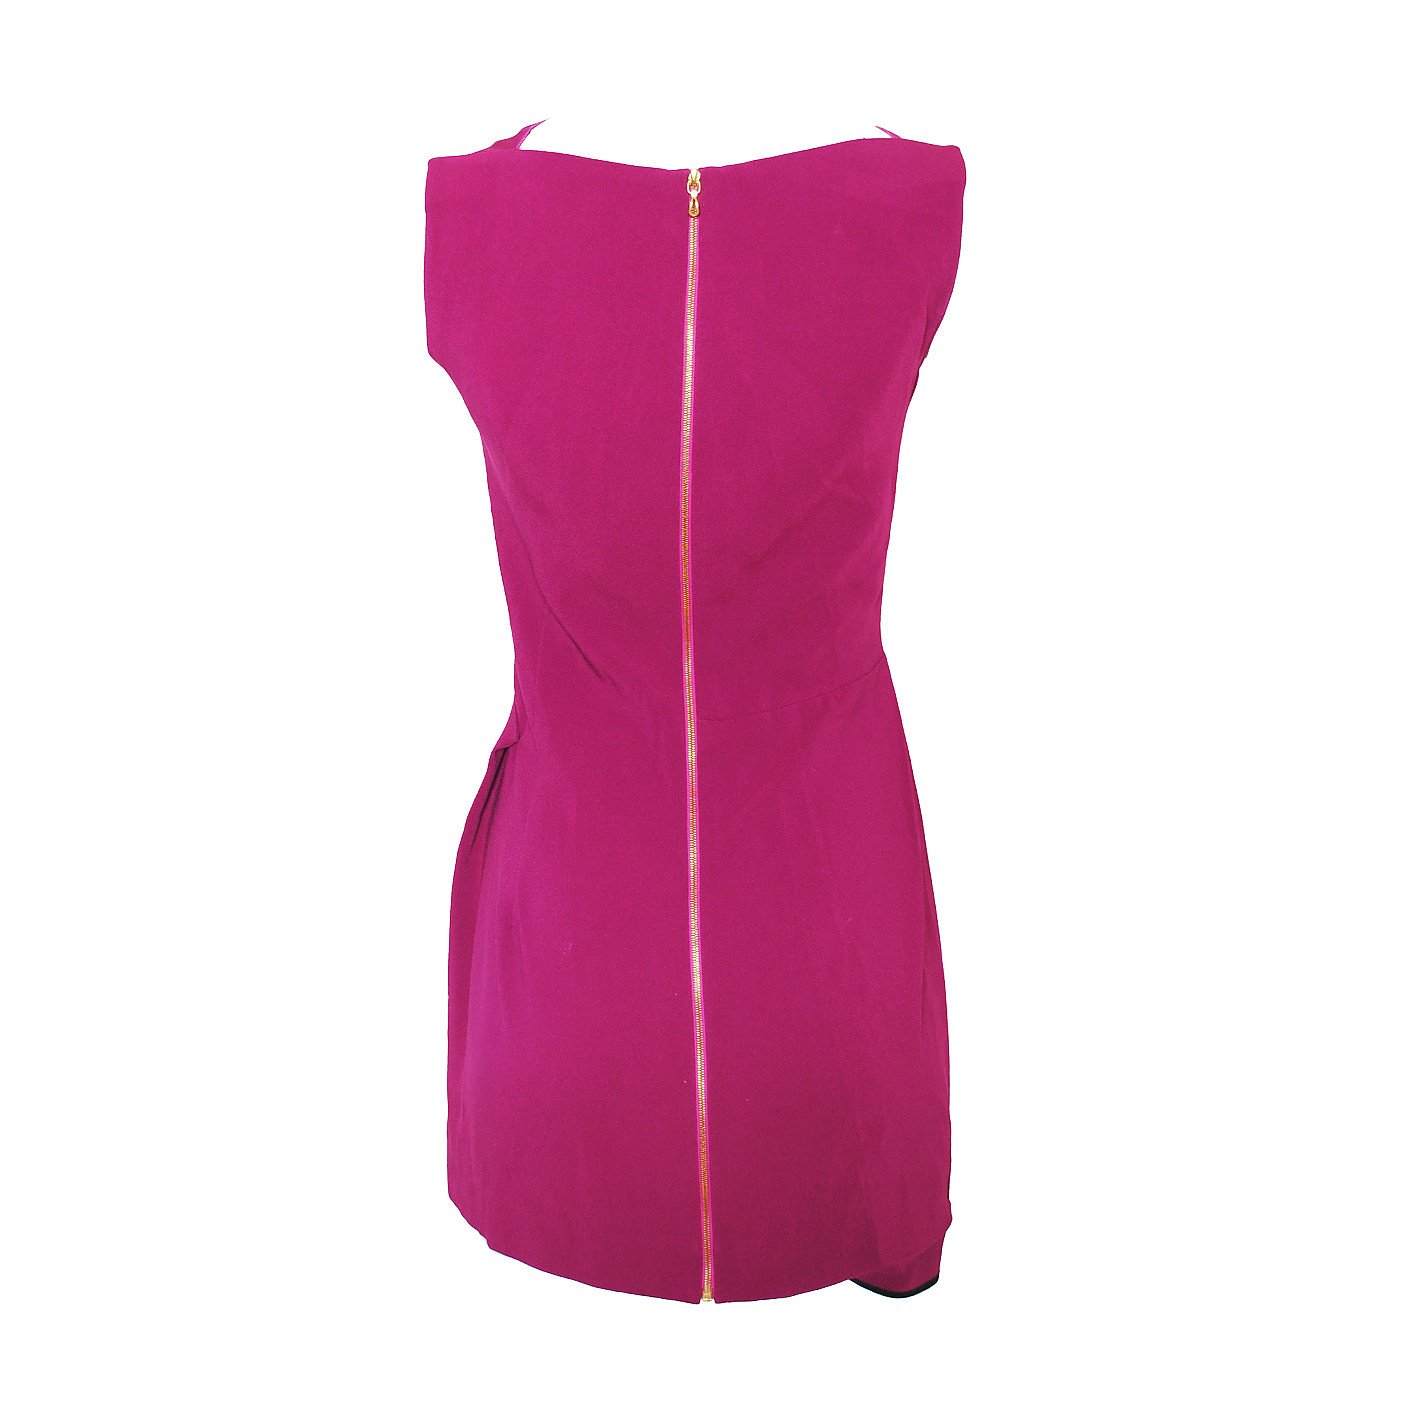 RM by Roland Mouret Darted Sleeveless Dress